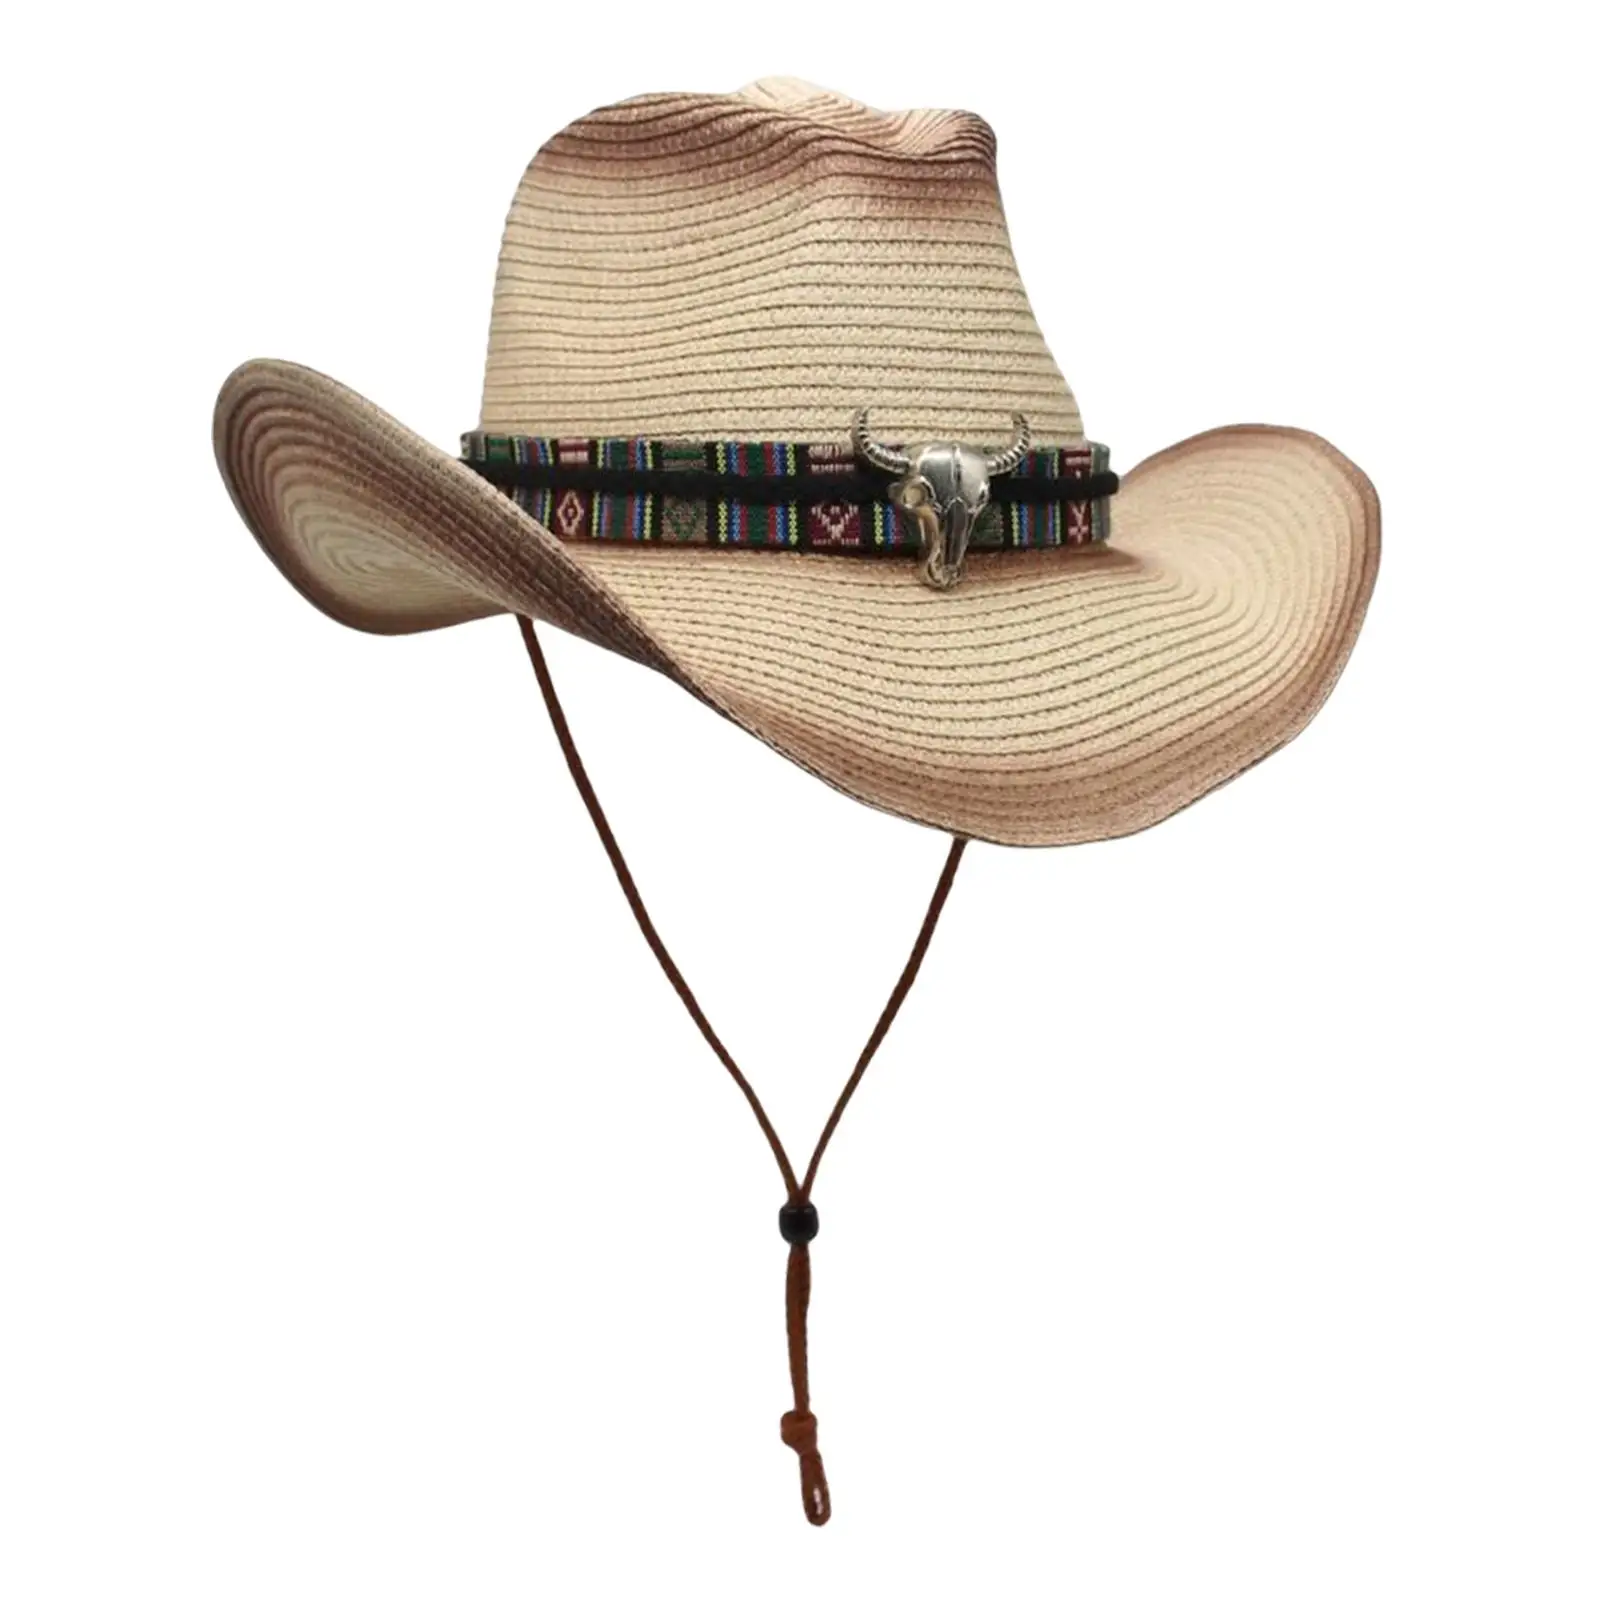 Western Cowboy Sun Protection Hat Shapeable for Outdoor Leisure Beach